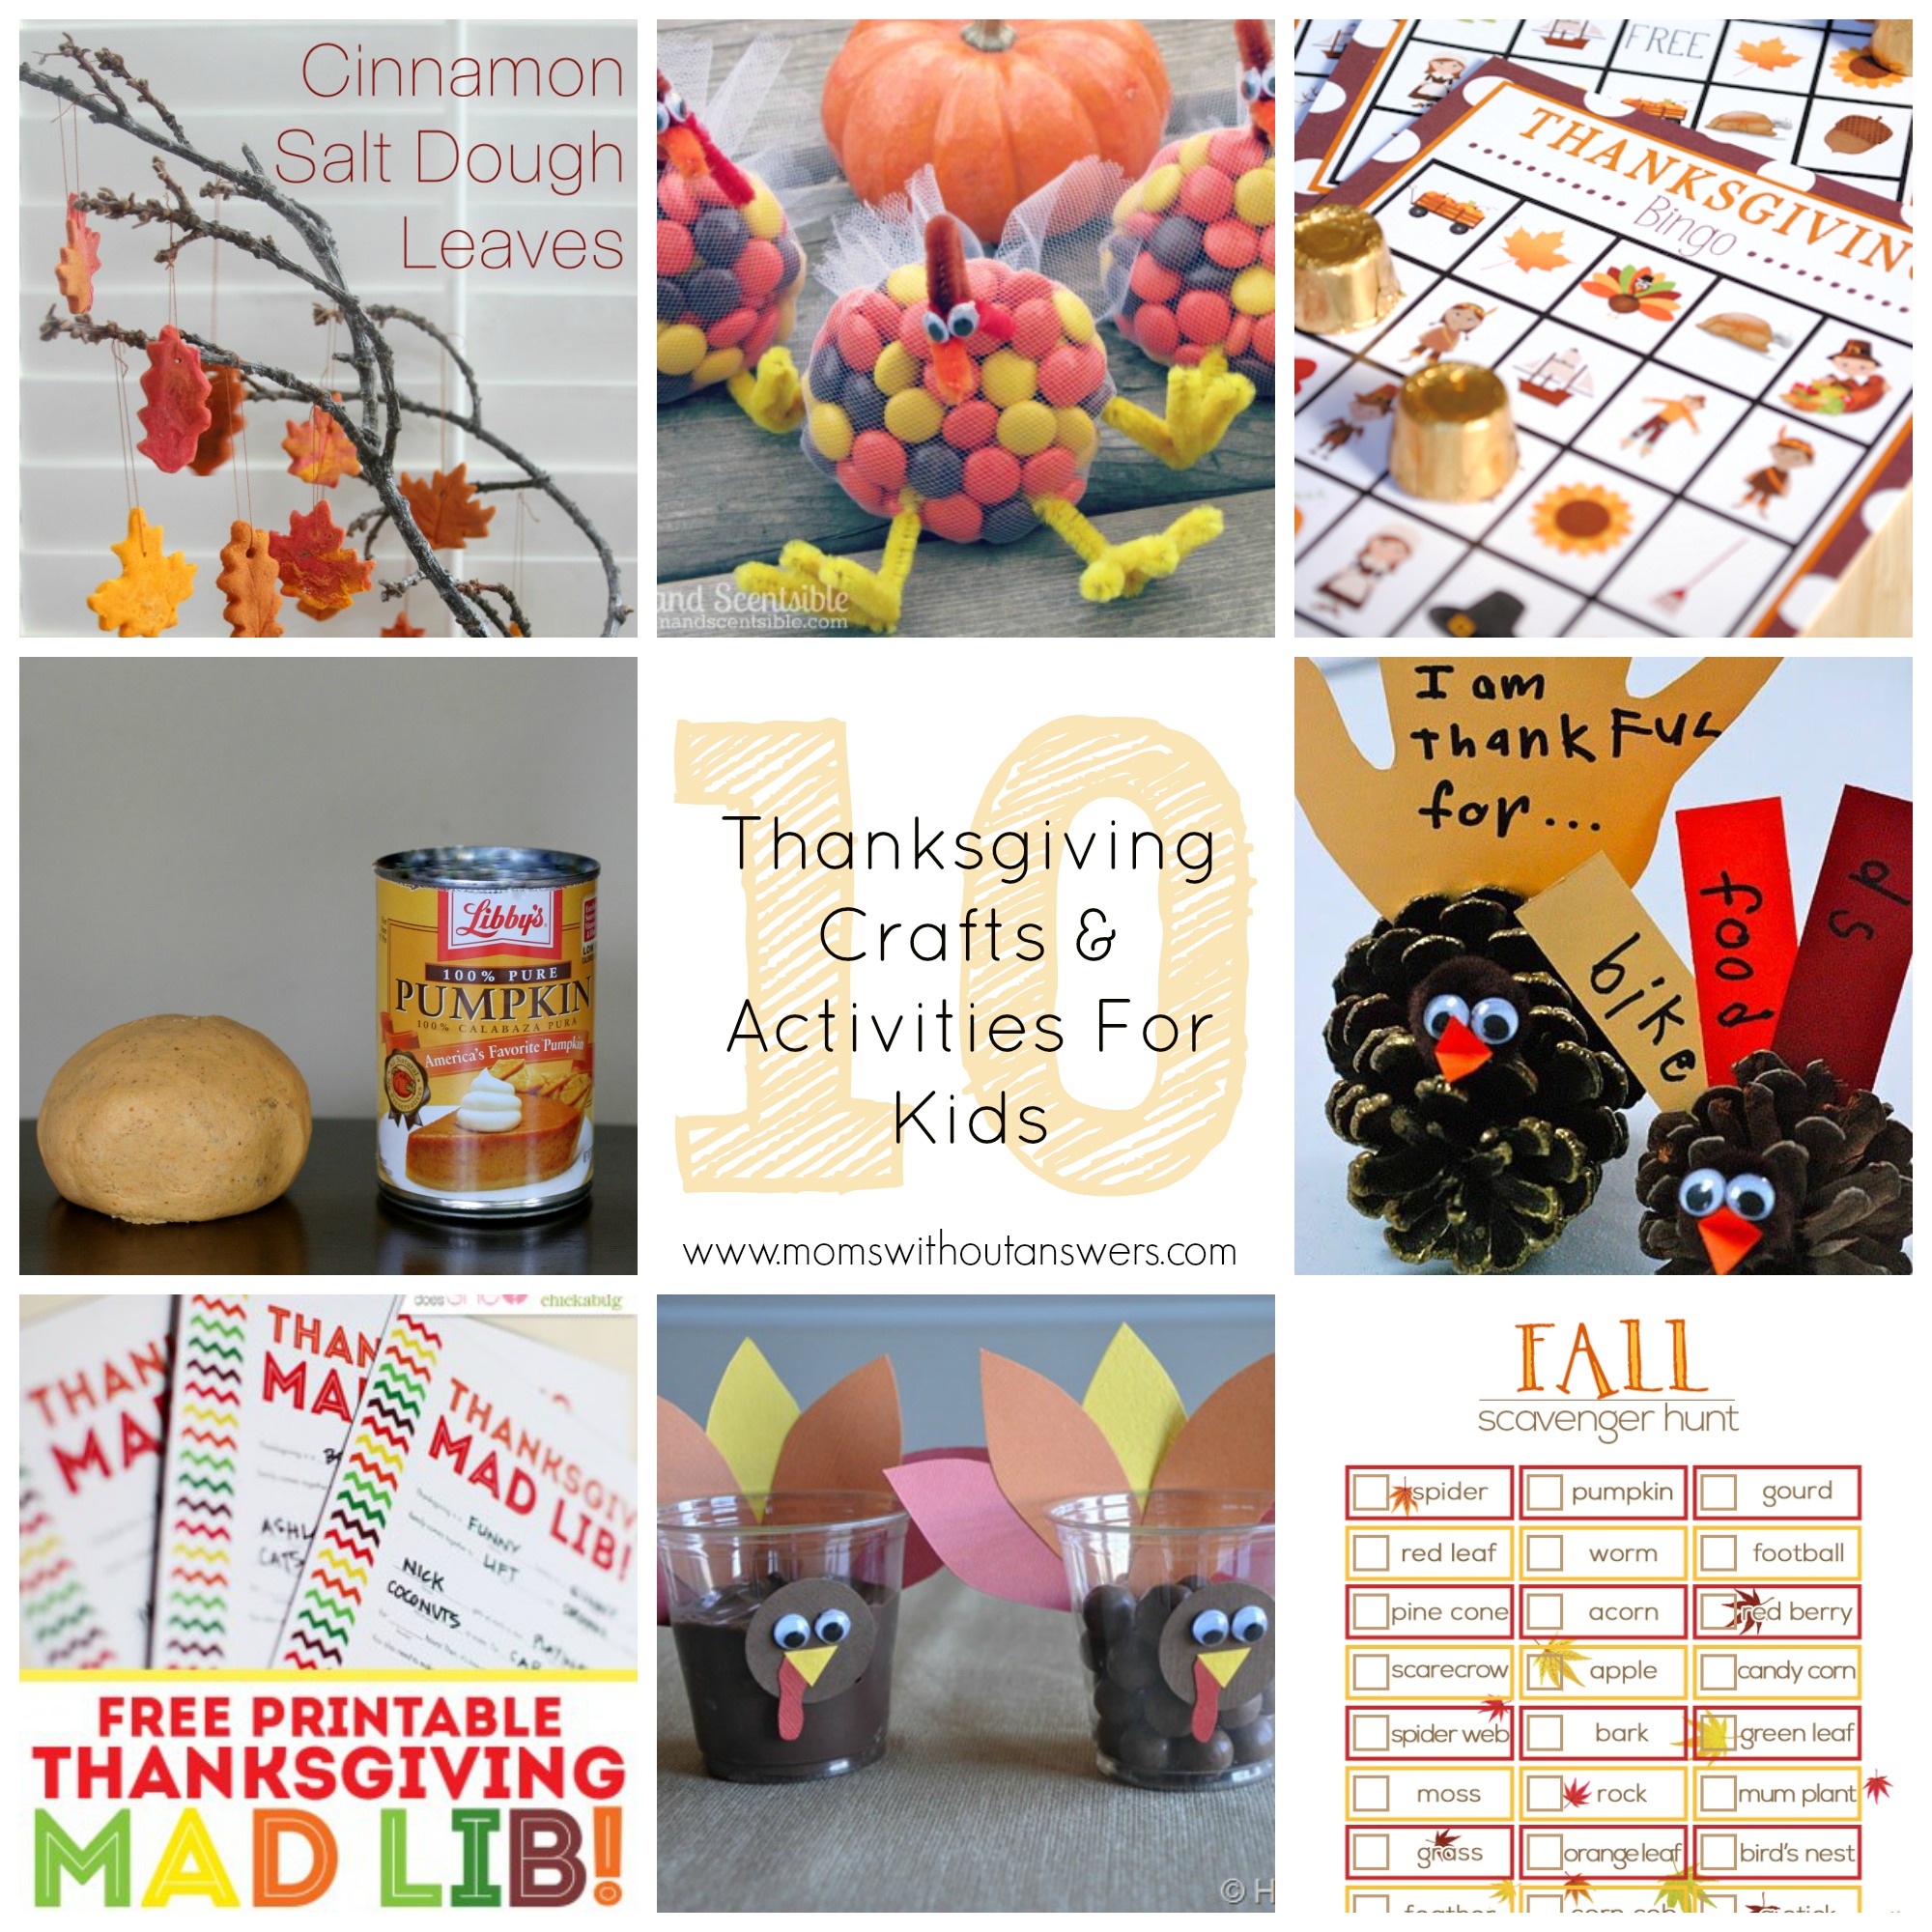 10 Thanksgiving Crafts & Activities for Kids